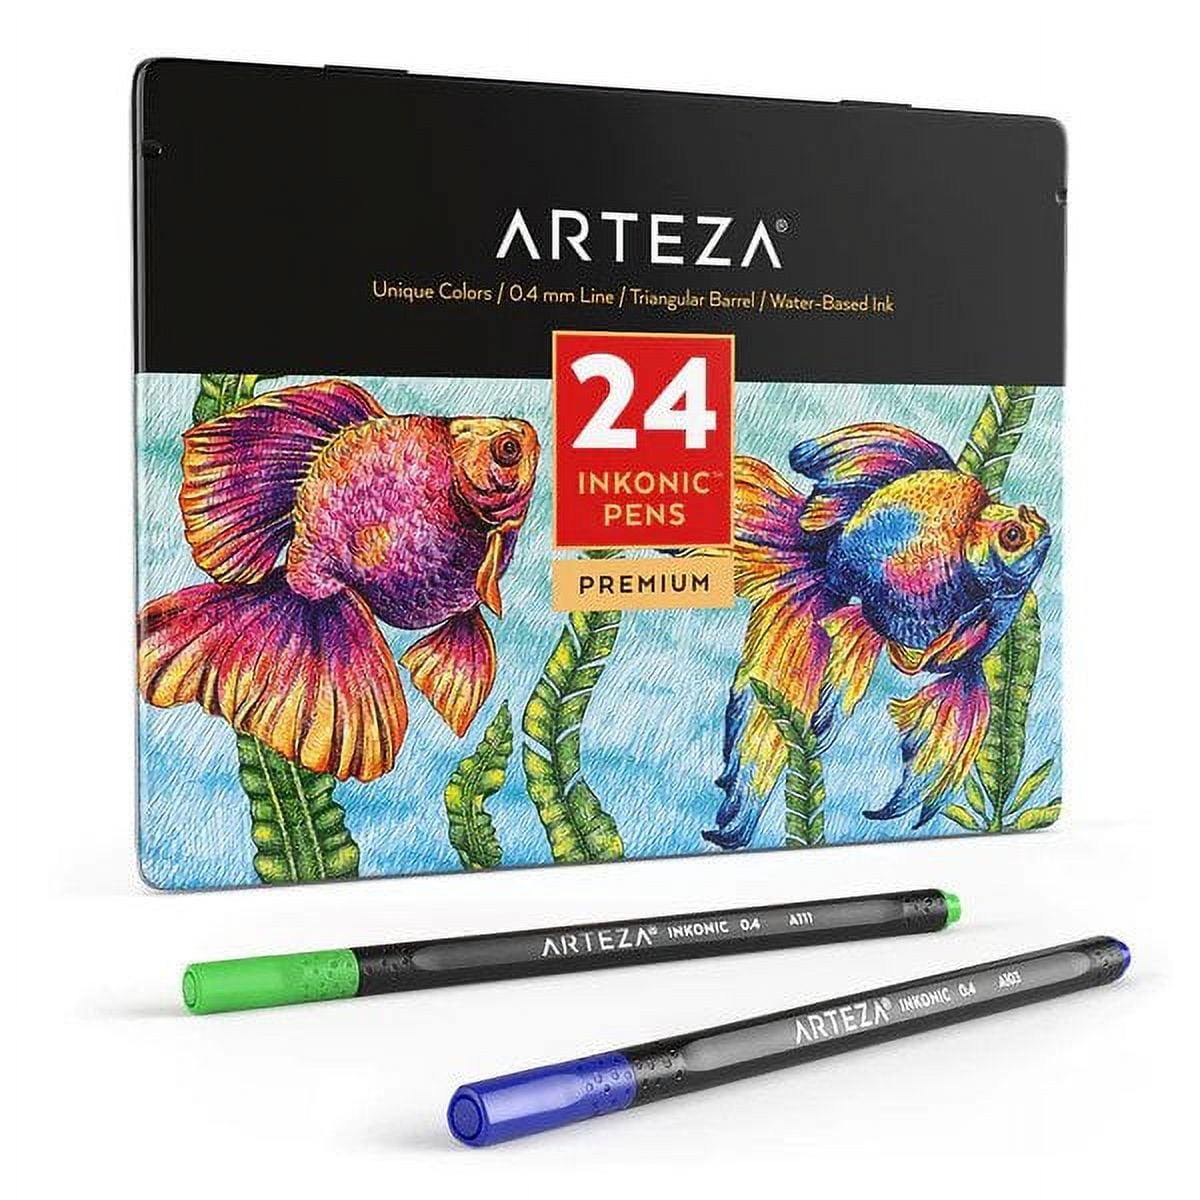 Arteza pens • Compare (68 products) find best prices »